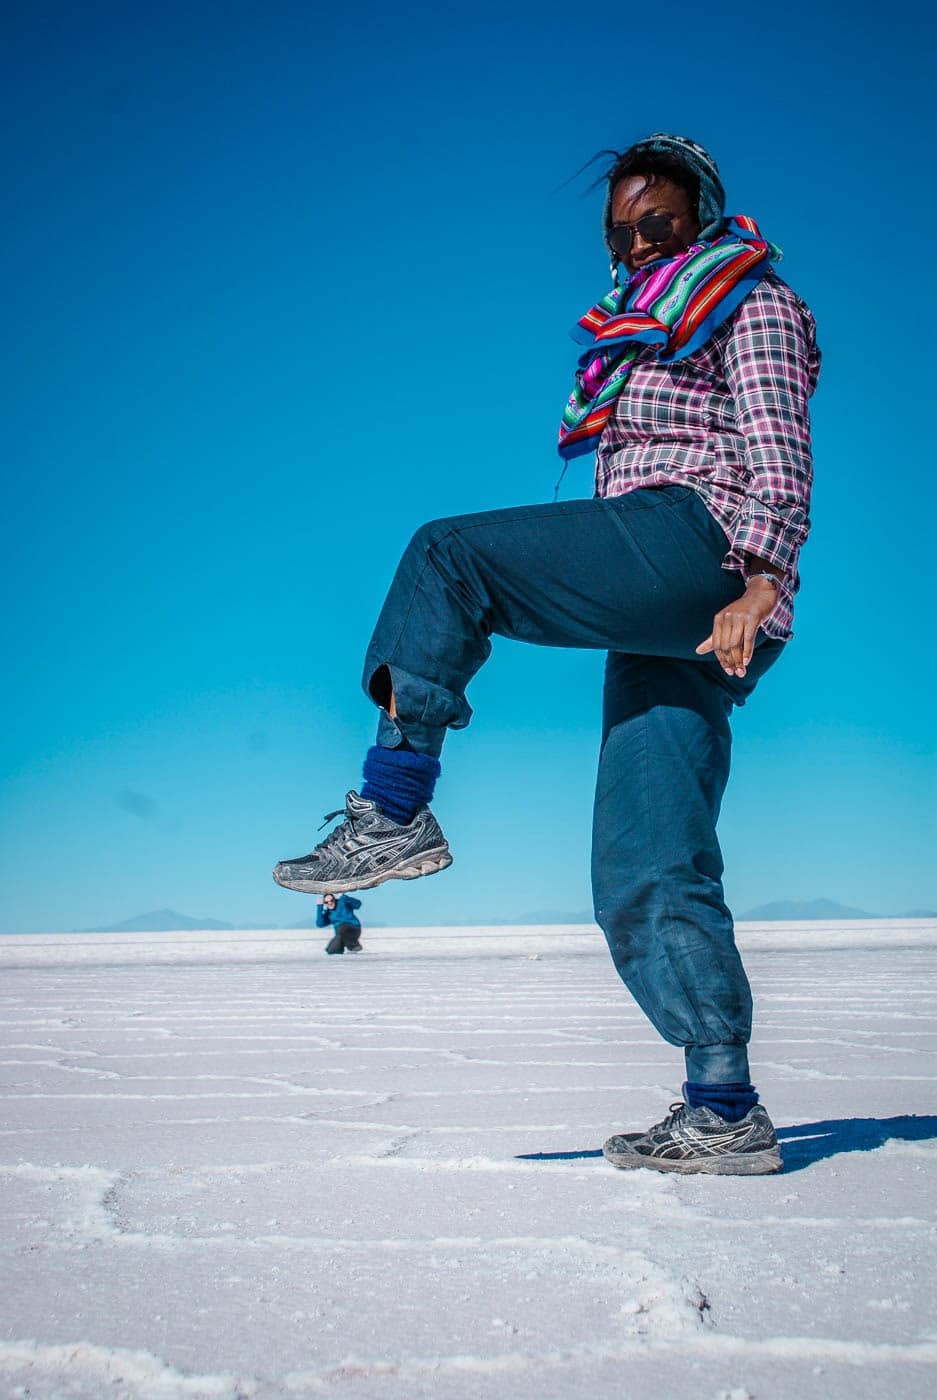 Salar de Uyuni I South America Travel Bucket List. 90 Awesome Things to do in South America When Backpacking and Travelling #southamerica #bucketlist #traveldestinations